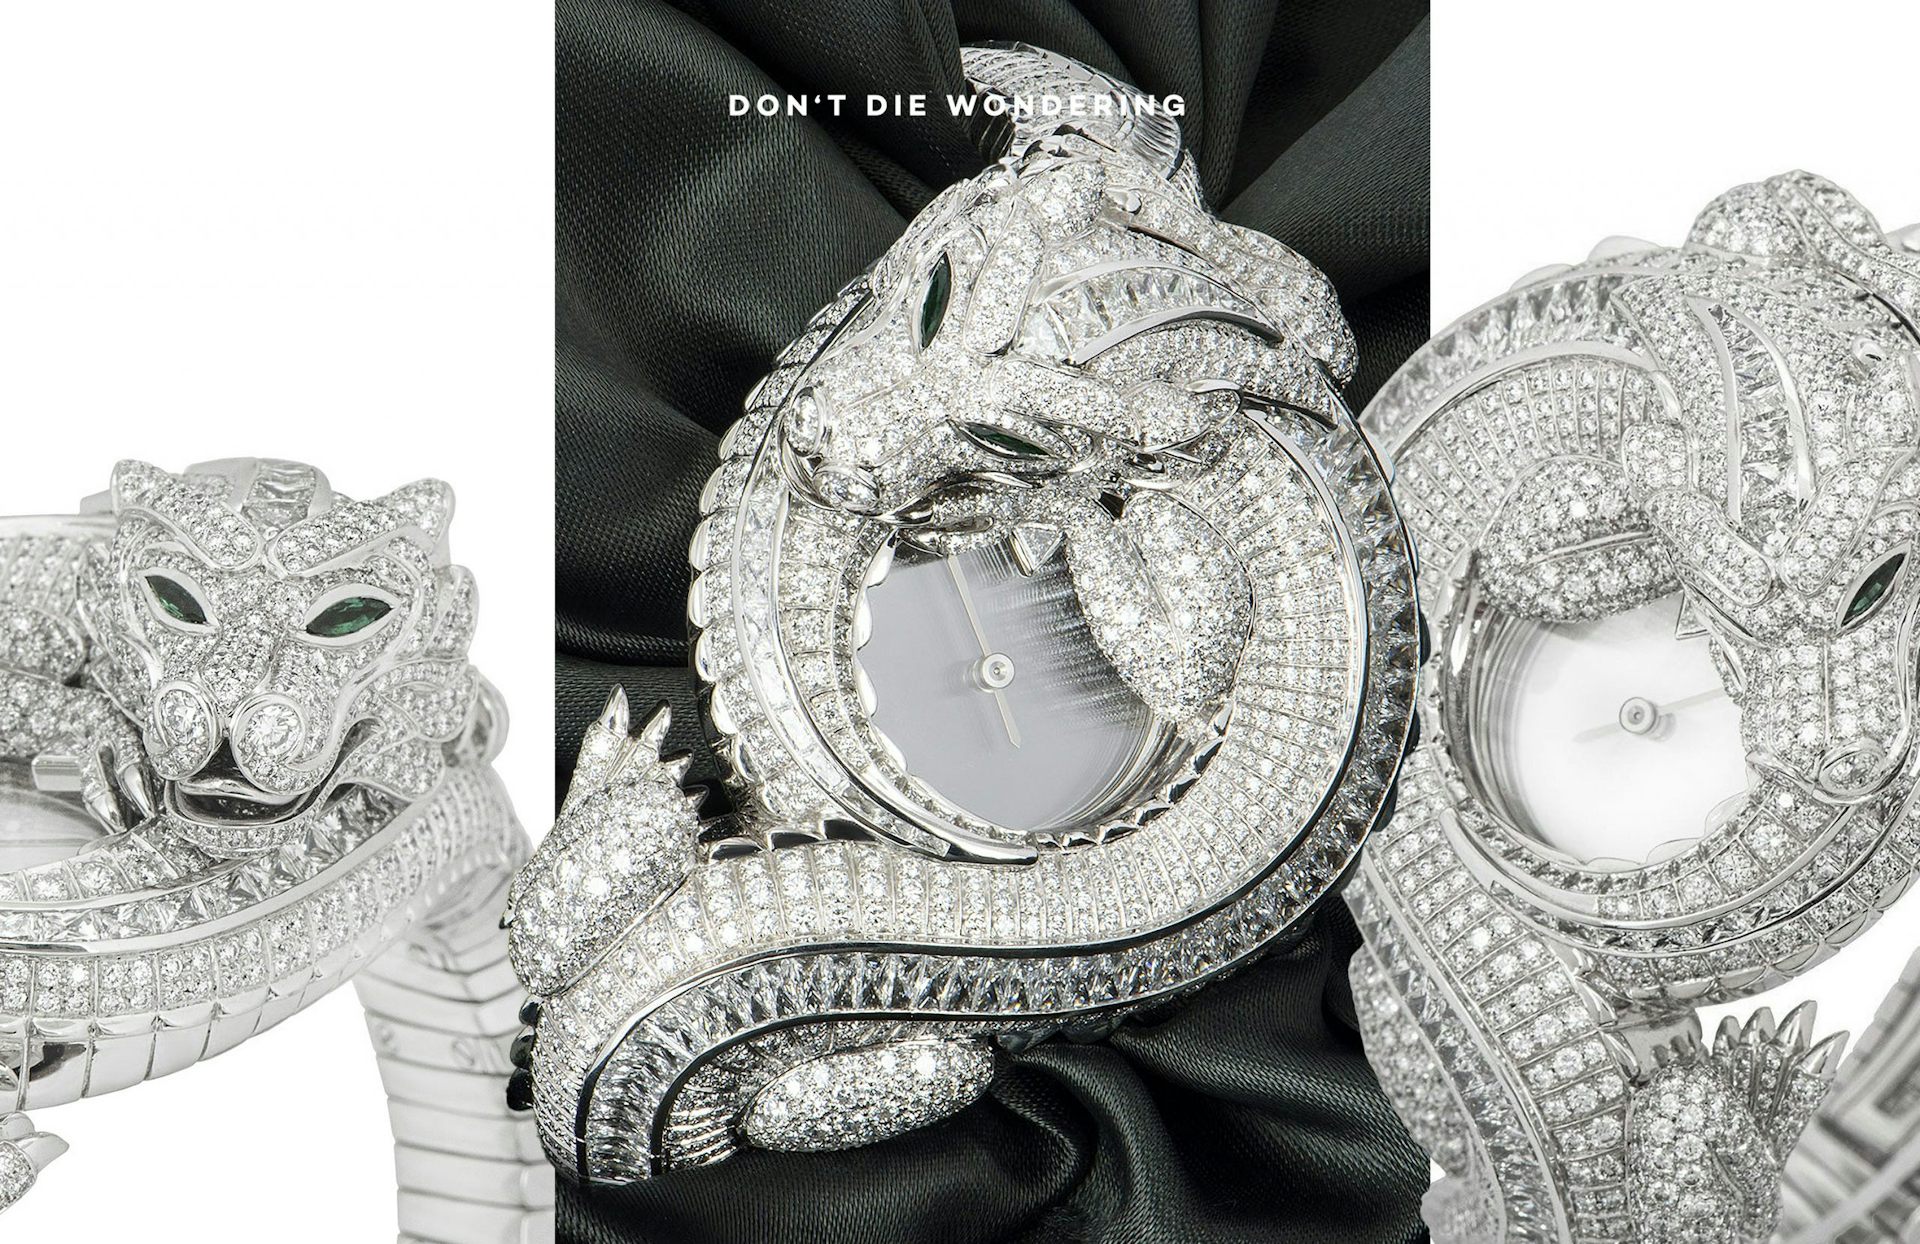 A Look At The Cartier Dragon Mystery Watch Dripping With White Gold